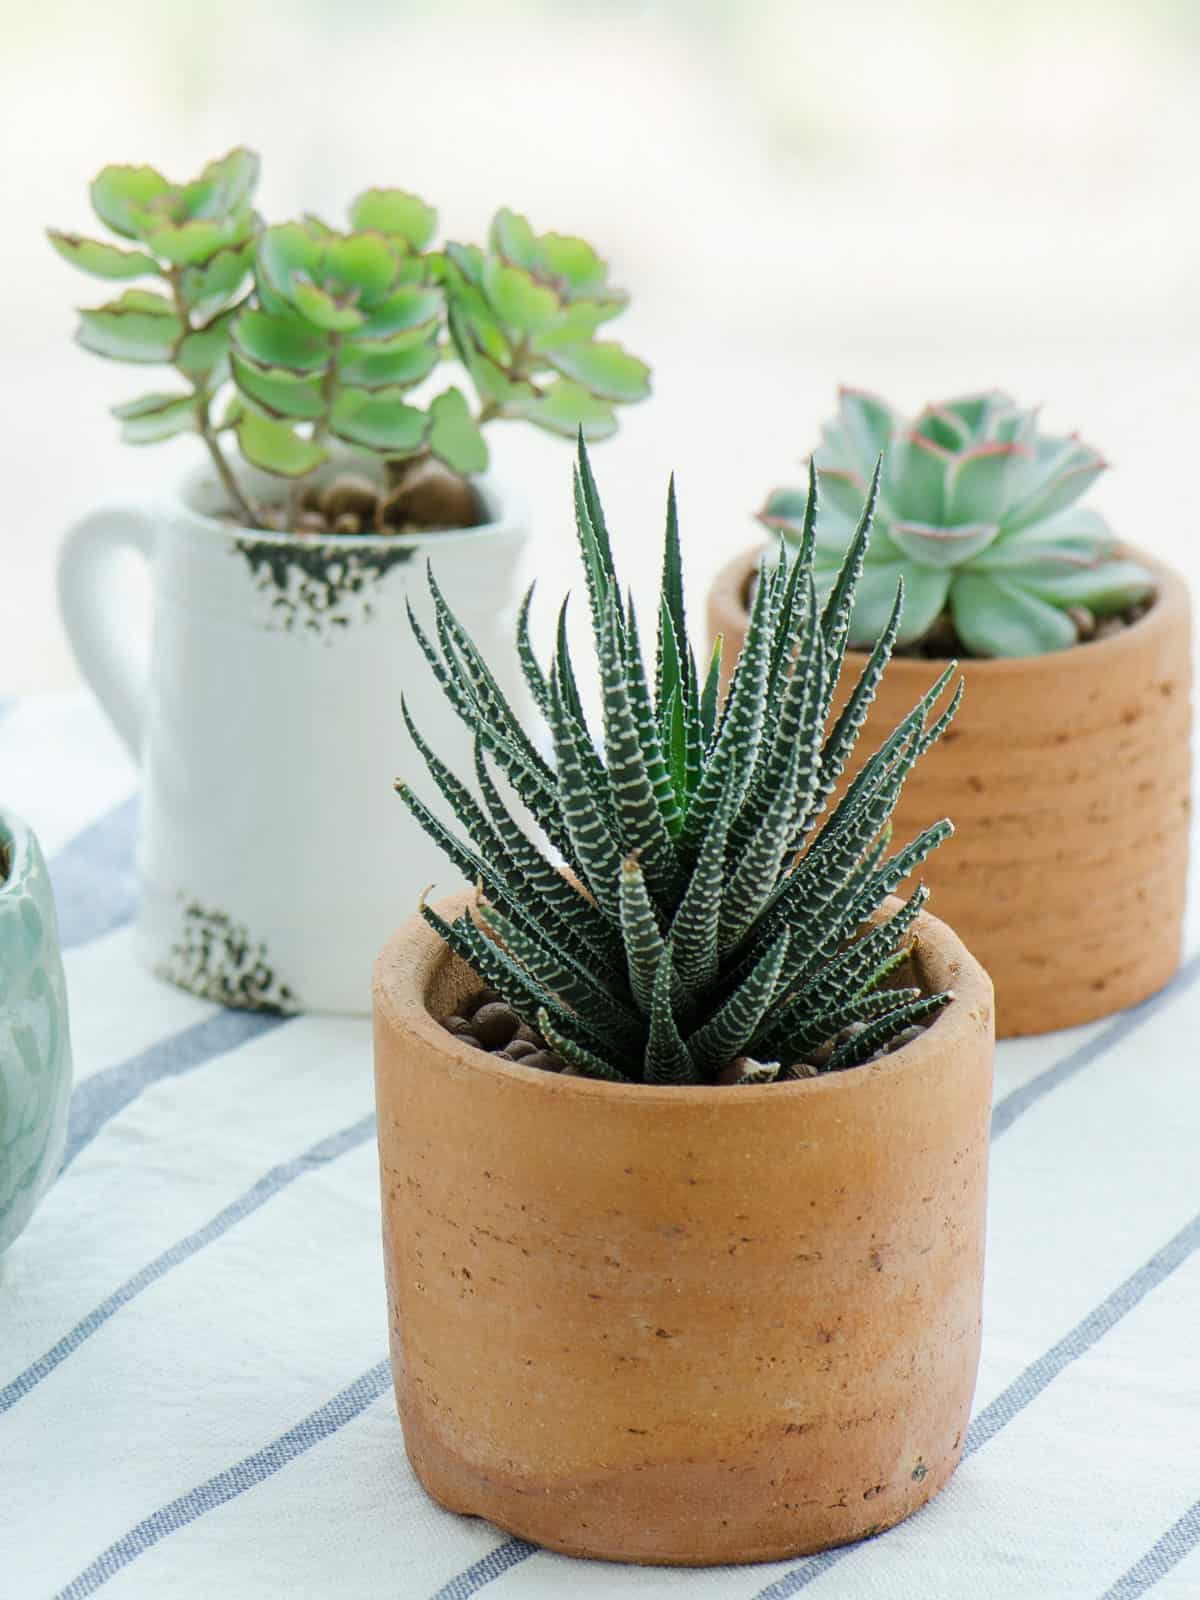 Three different succulents on a table